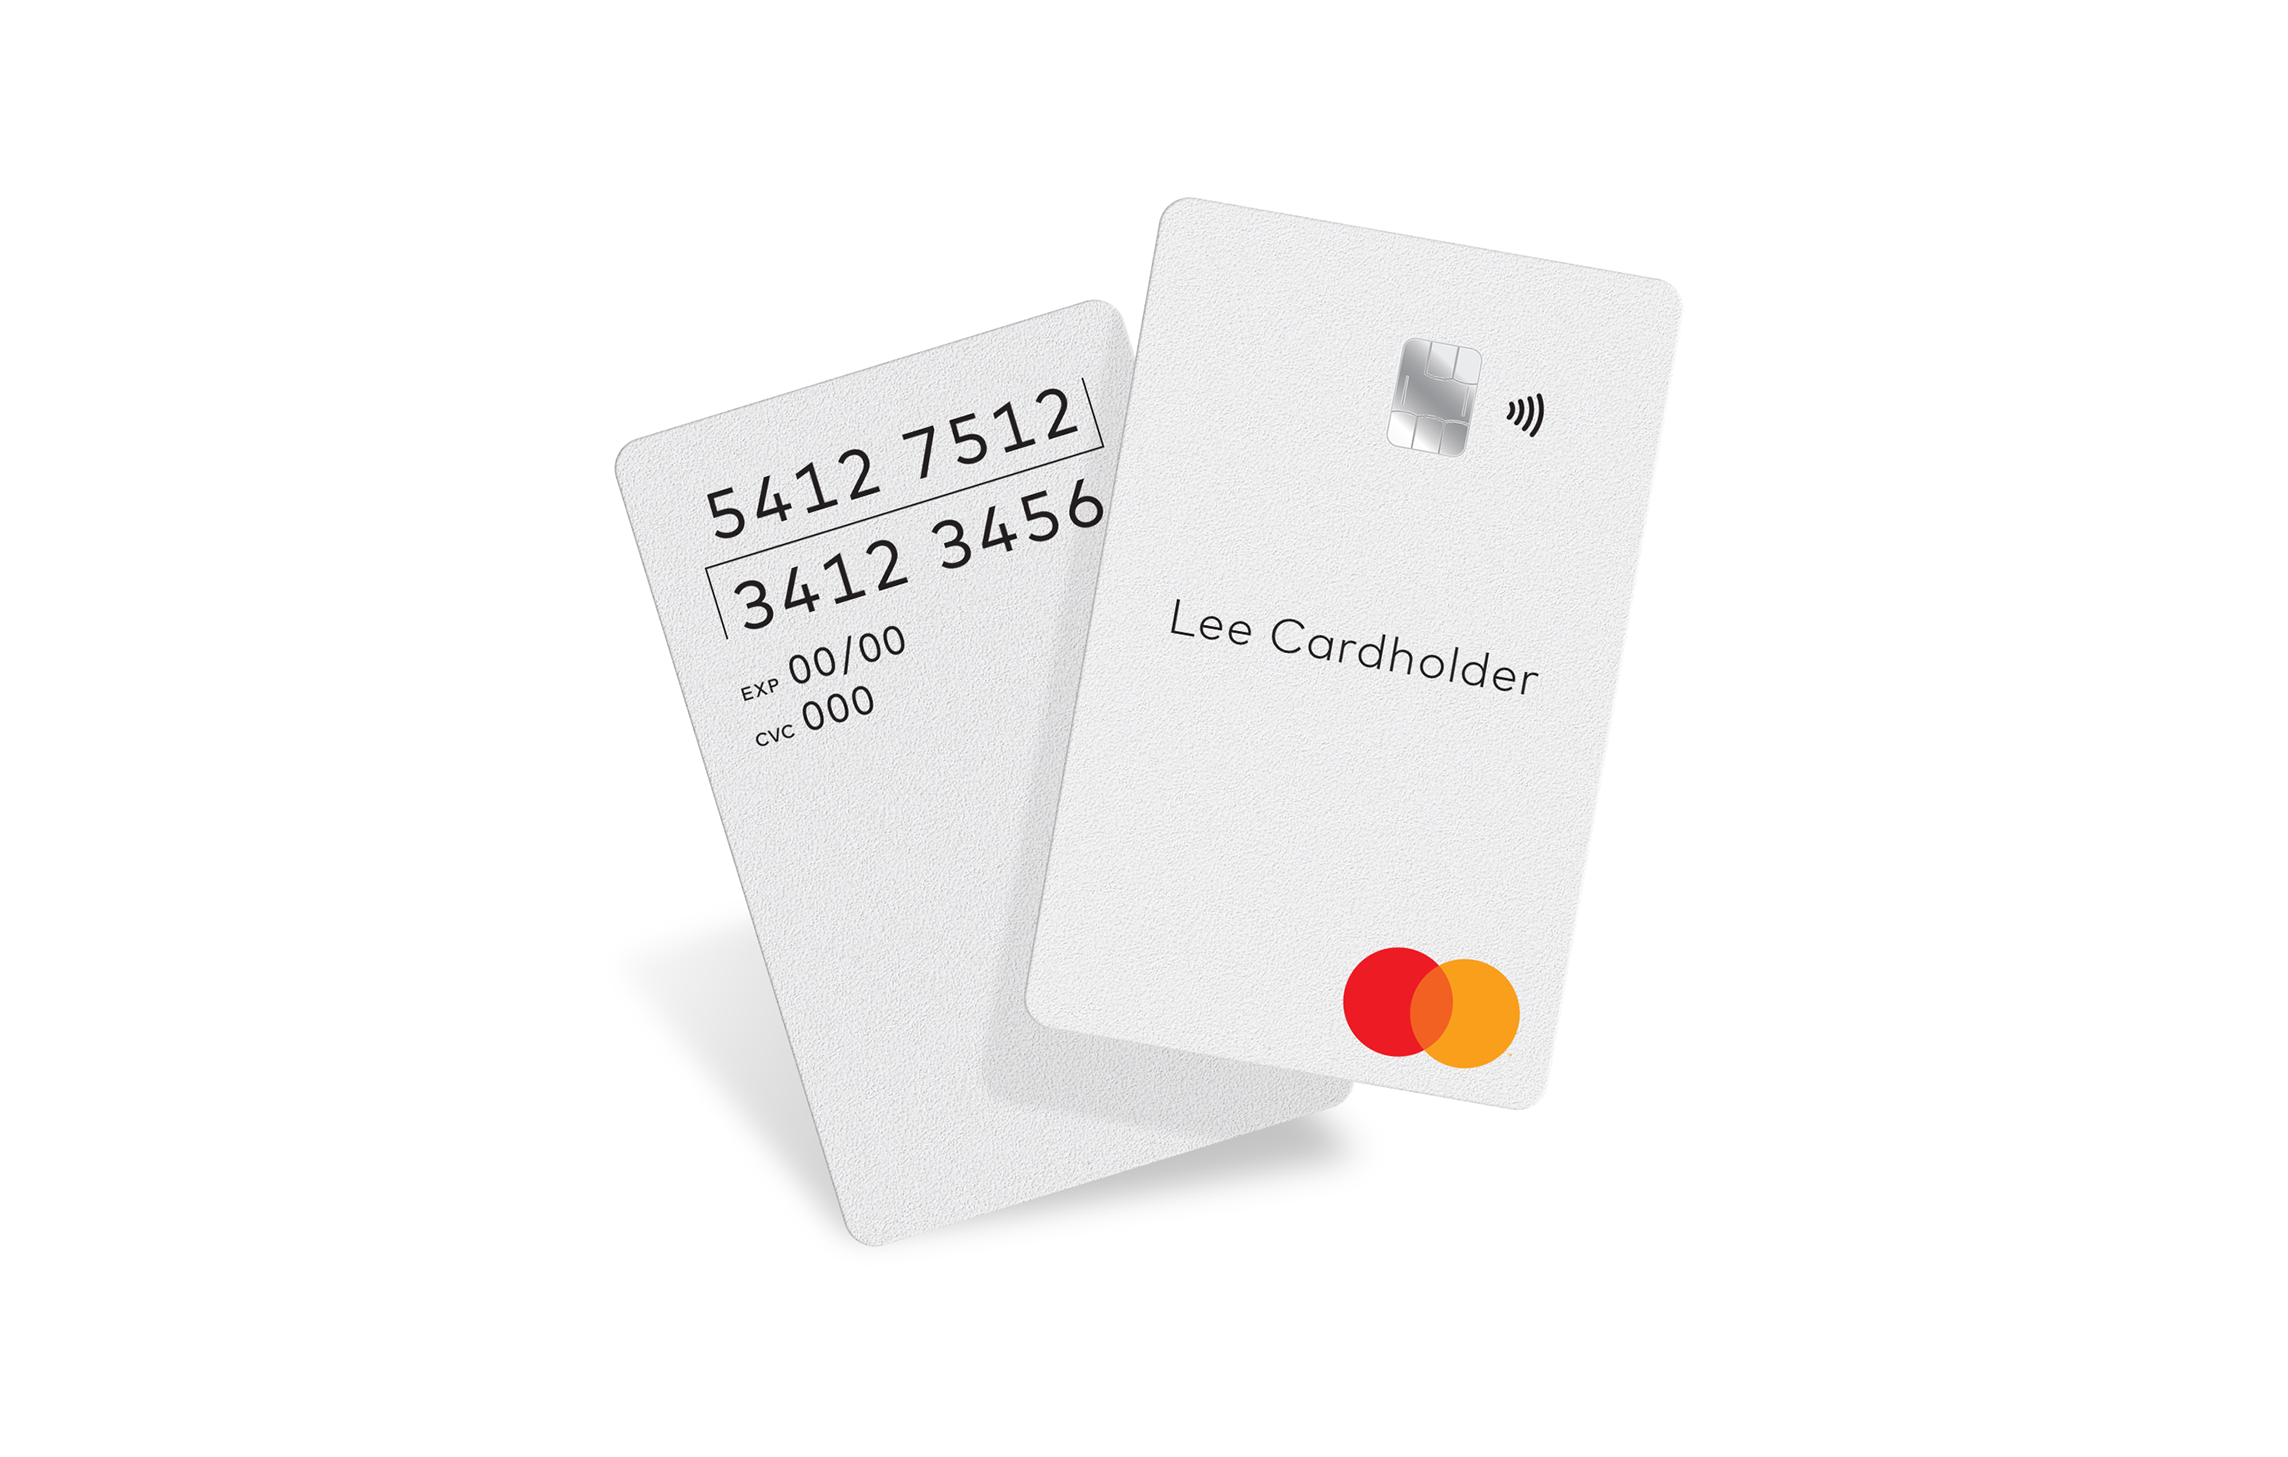 Mastercard will disappear credit and debit cards as we know them